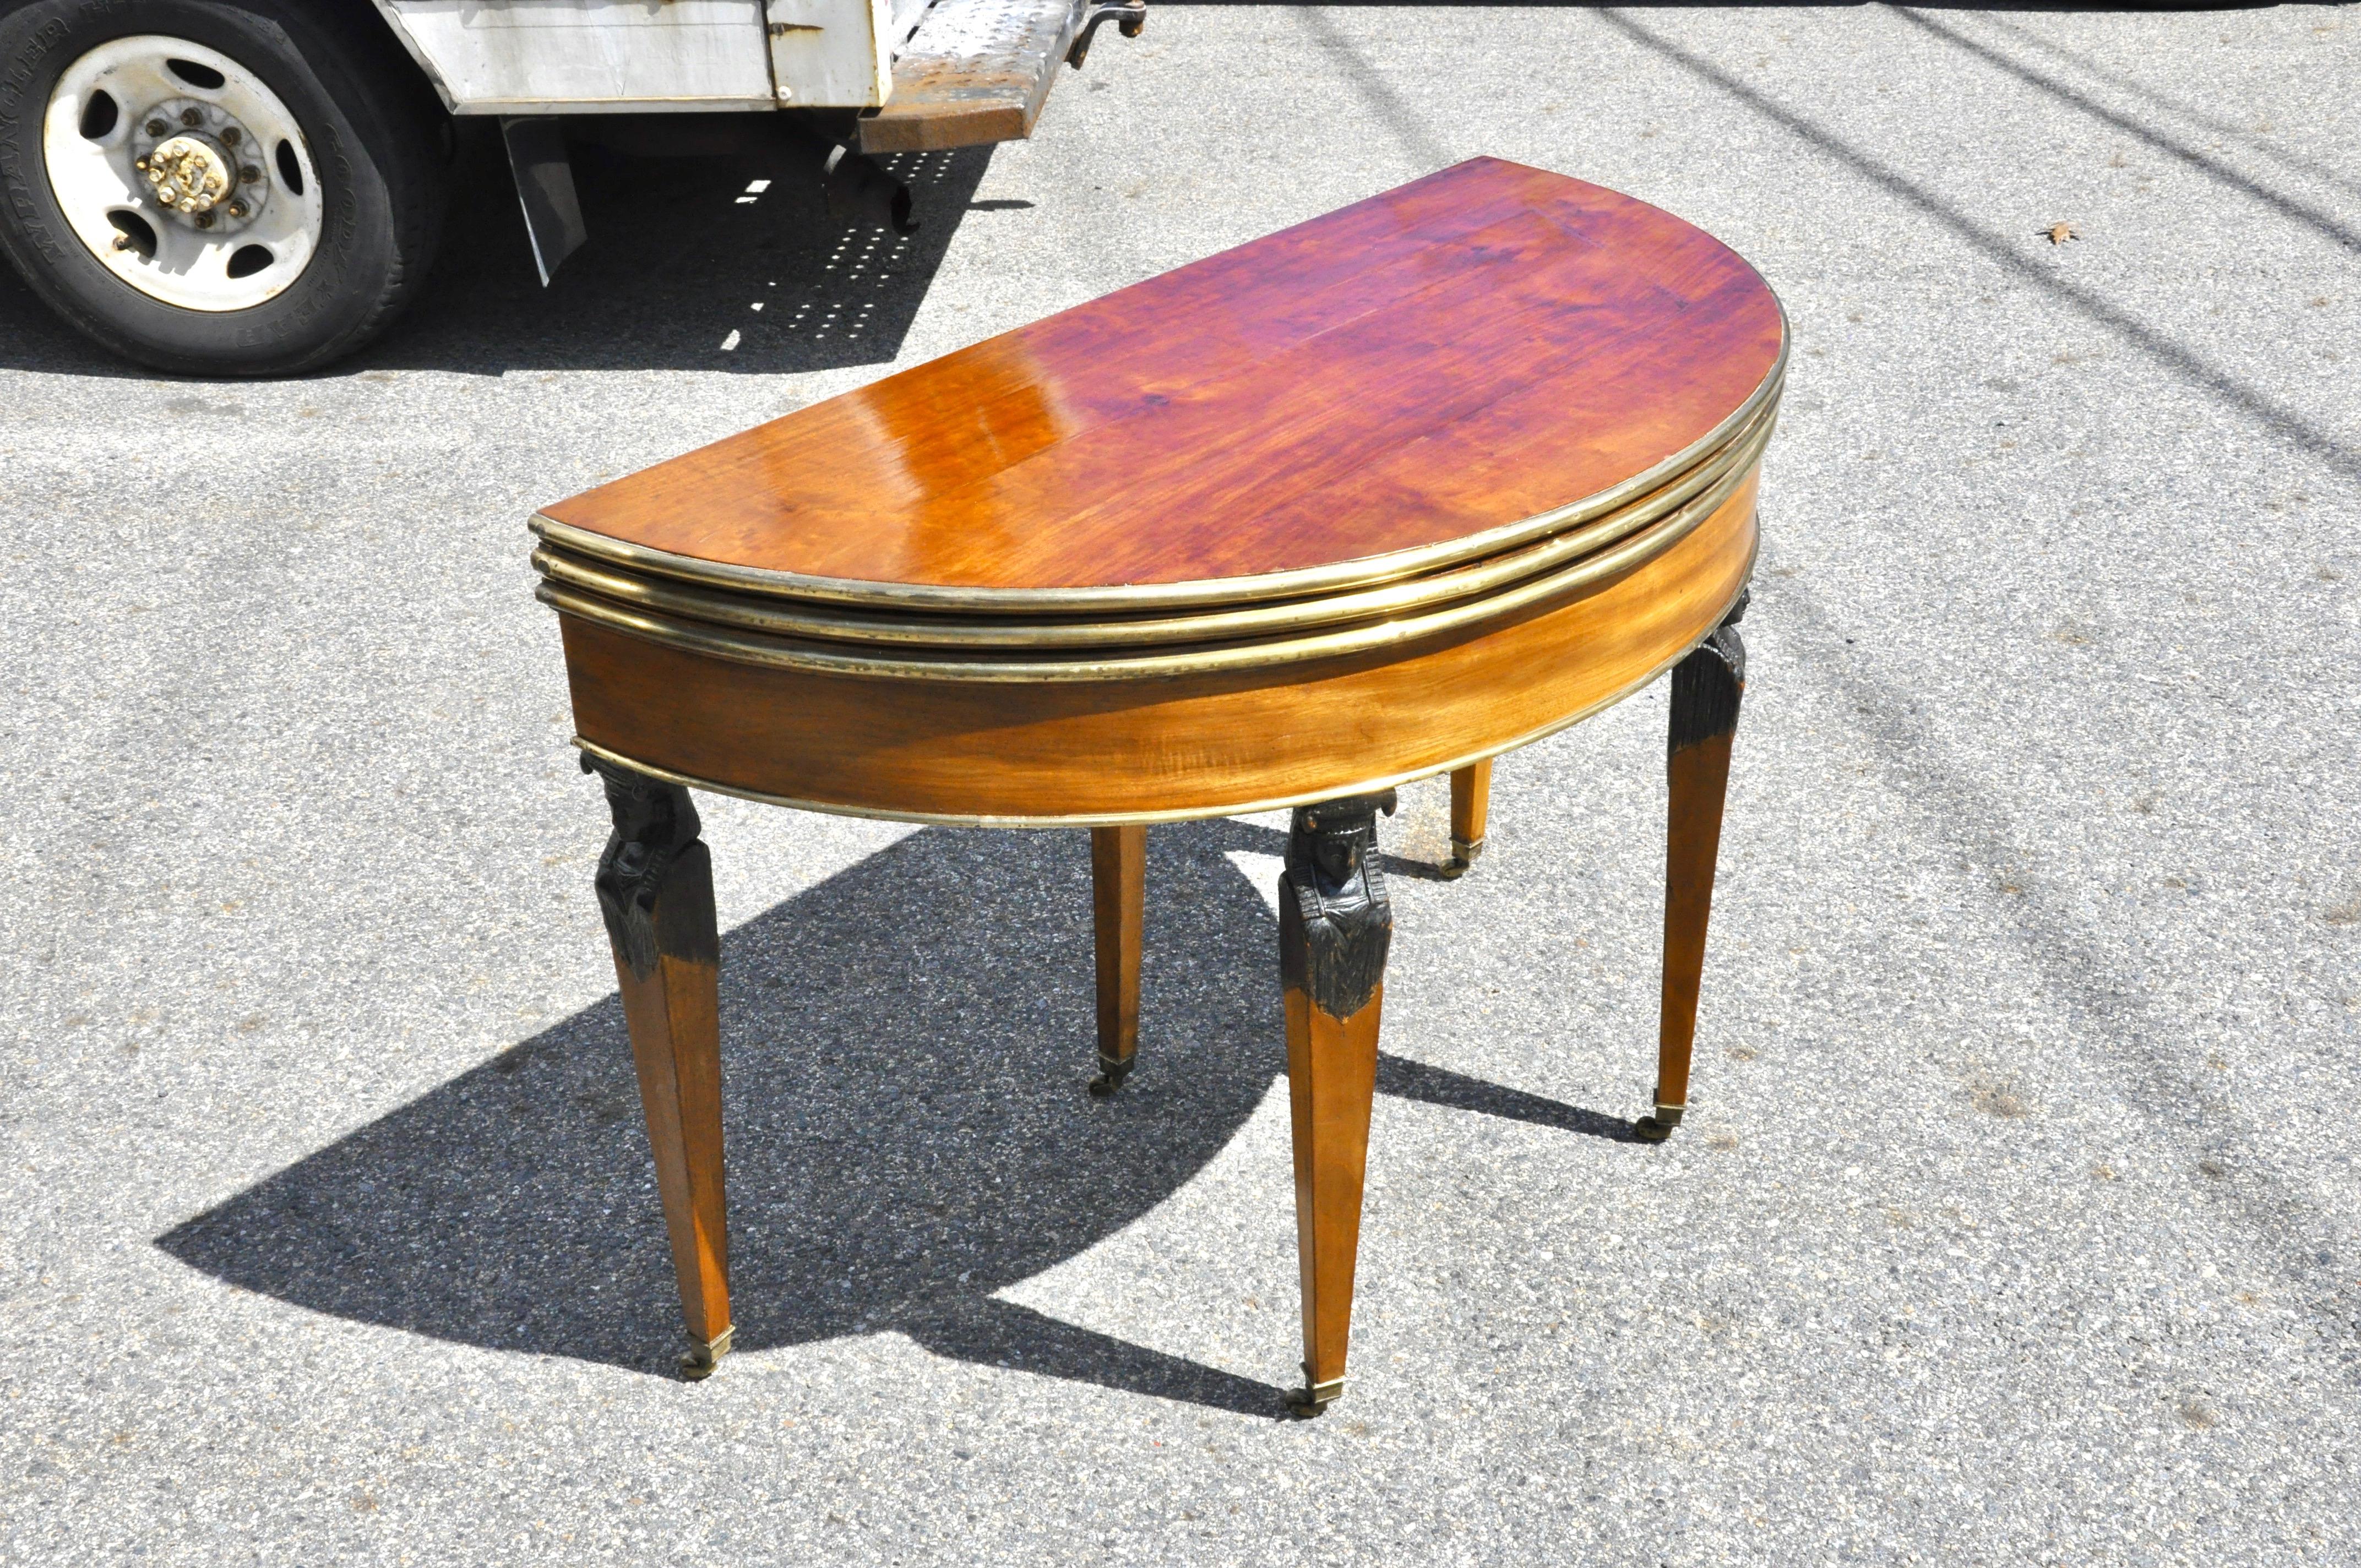 Period 18th century Russian mahogany flip top card table.

-- Demilune opens to mahogany round table or a third flip to a felt covered card table
-- Exquisite wood
-- Egyptian neoclassical caryatid legs
-- Brass bound
-- Opens to a mahogany